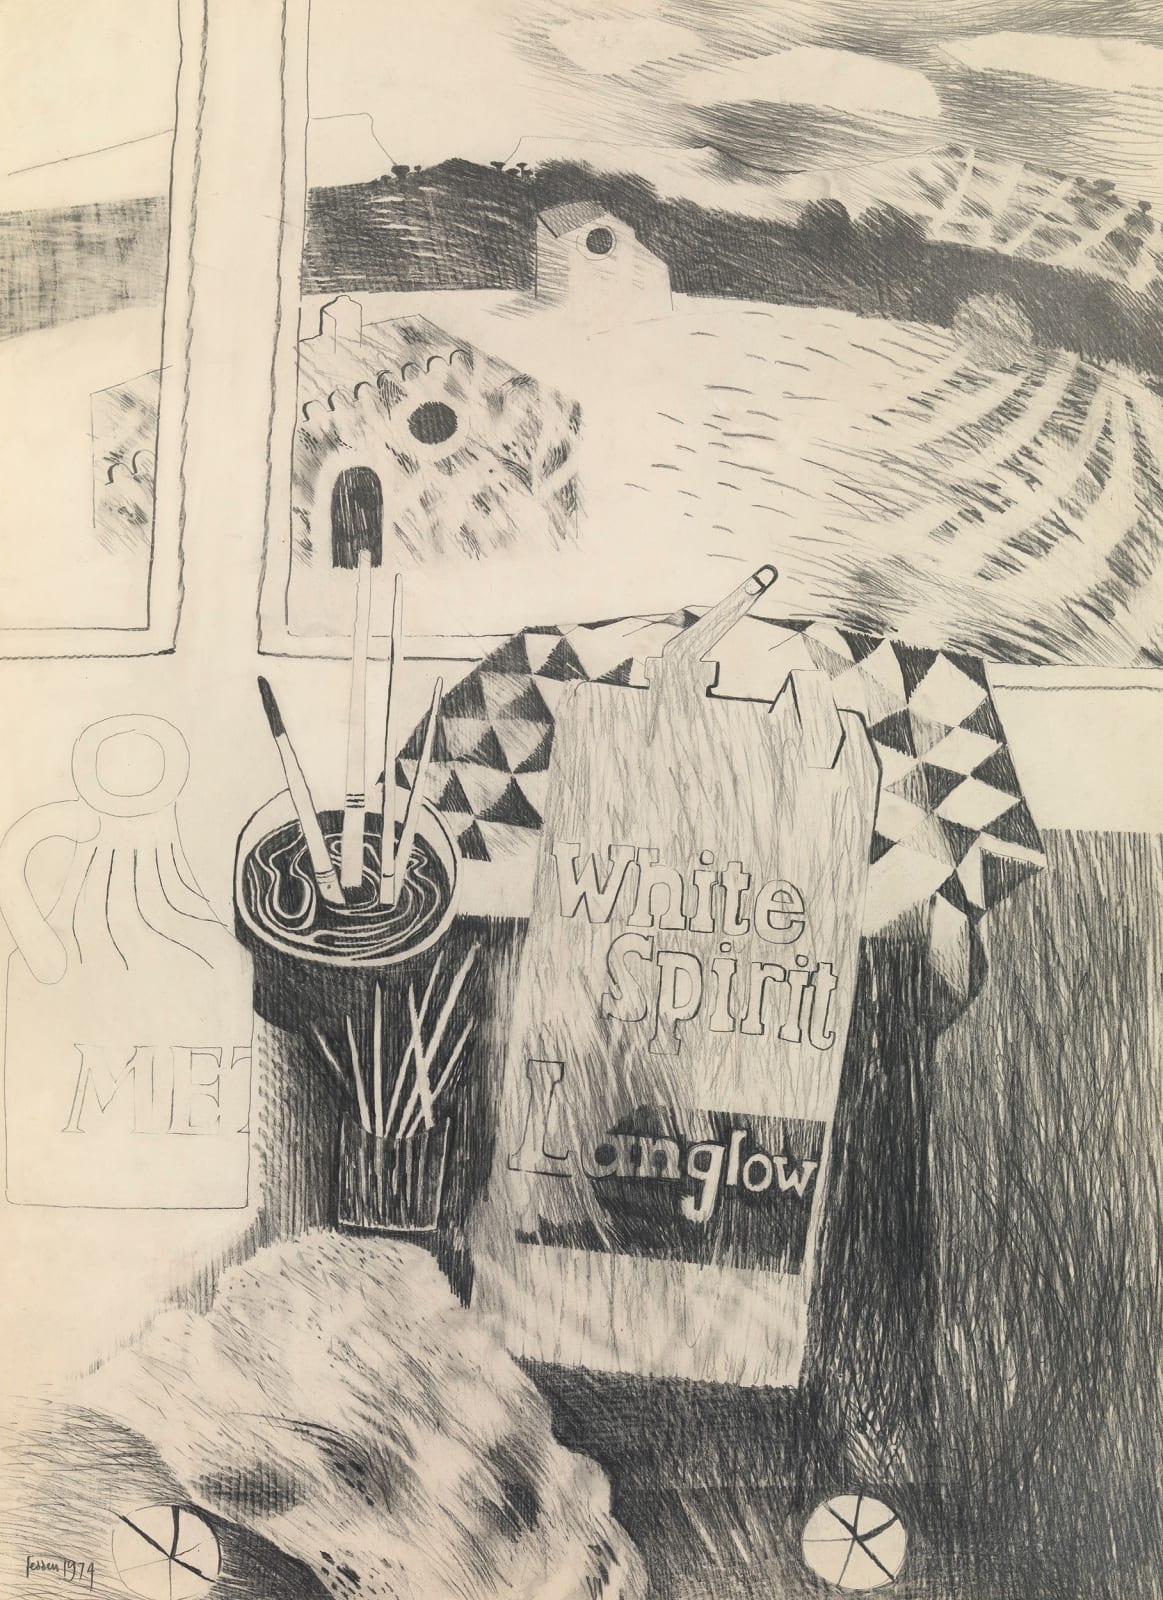 Mary Fedden, The Etching Table, 1974